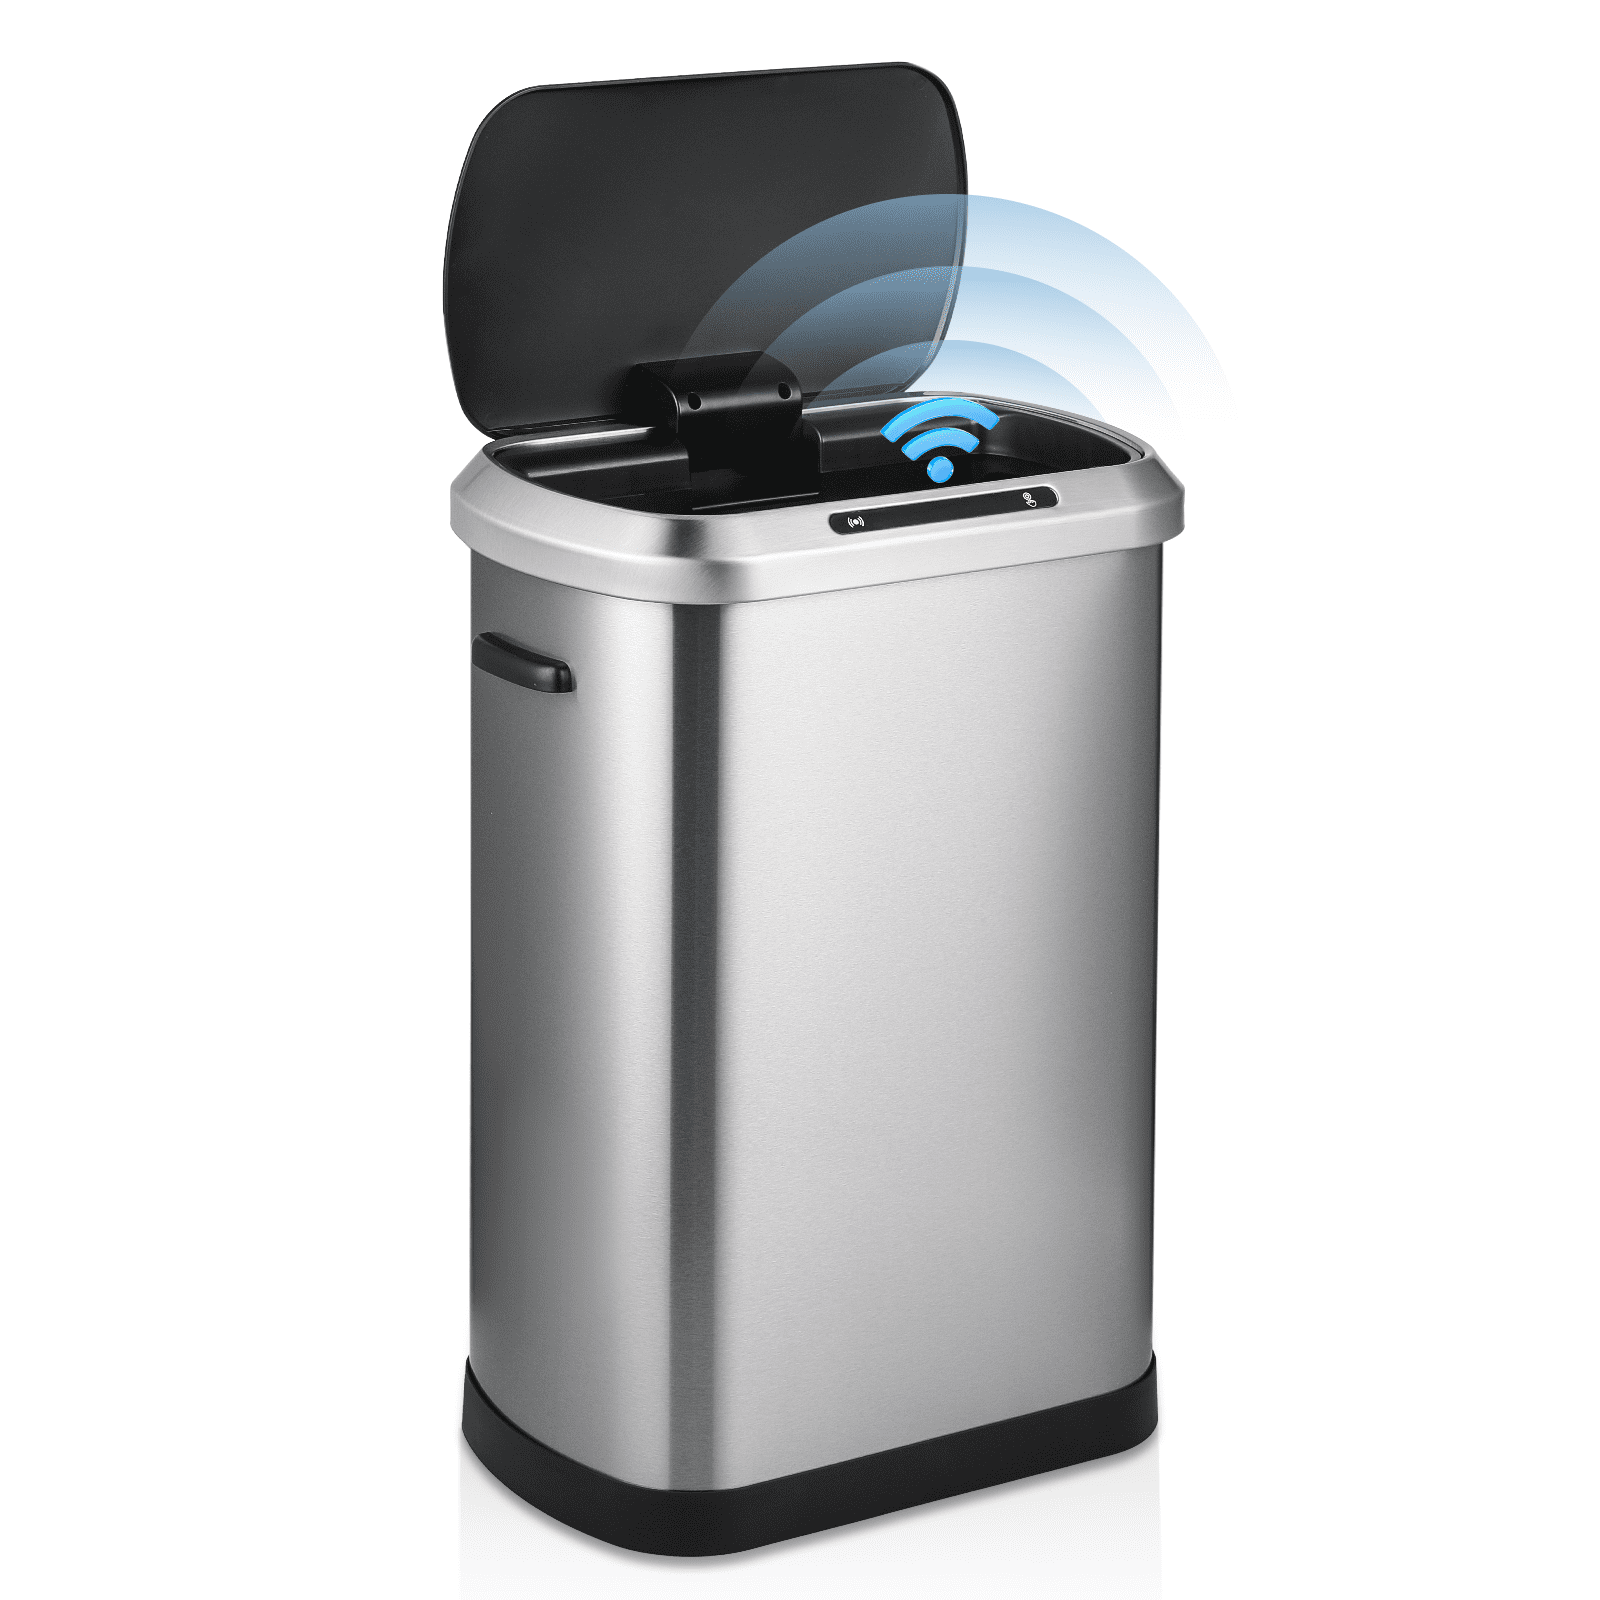 BestOffice Touch Free Sensor Stainless Steel Trash Can, 13 Gallon 